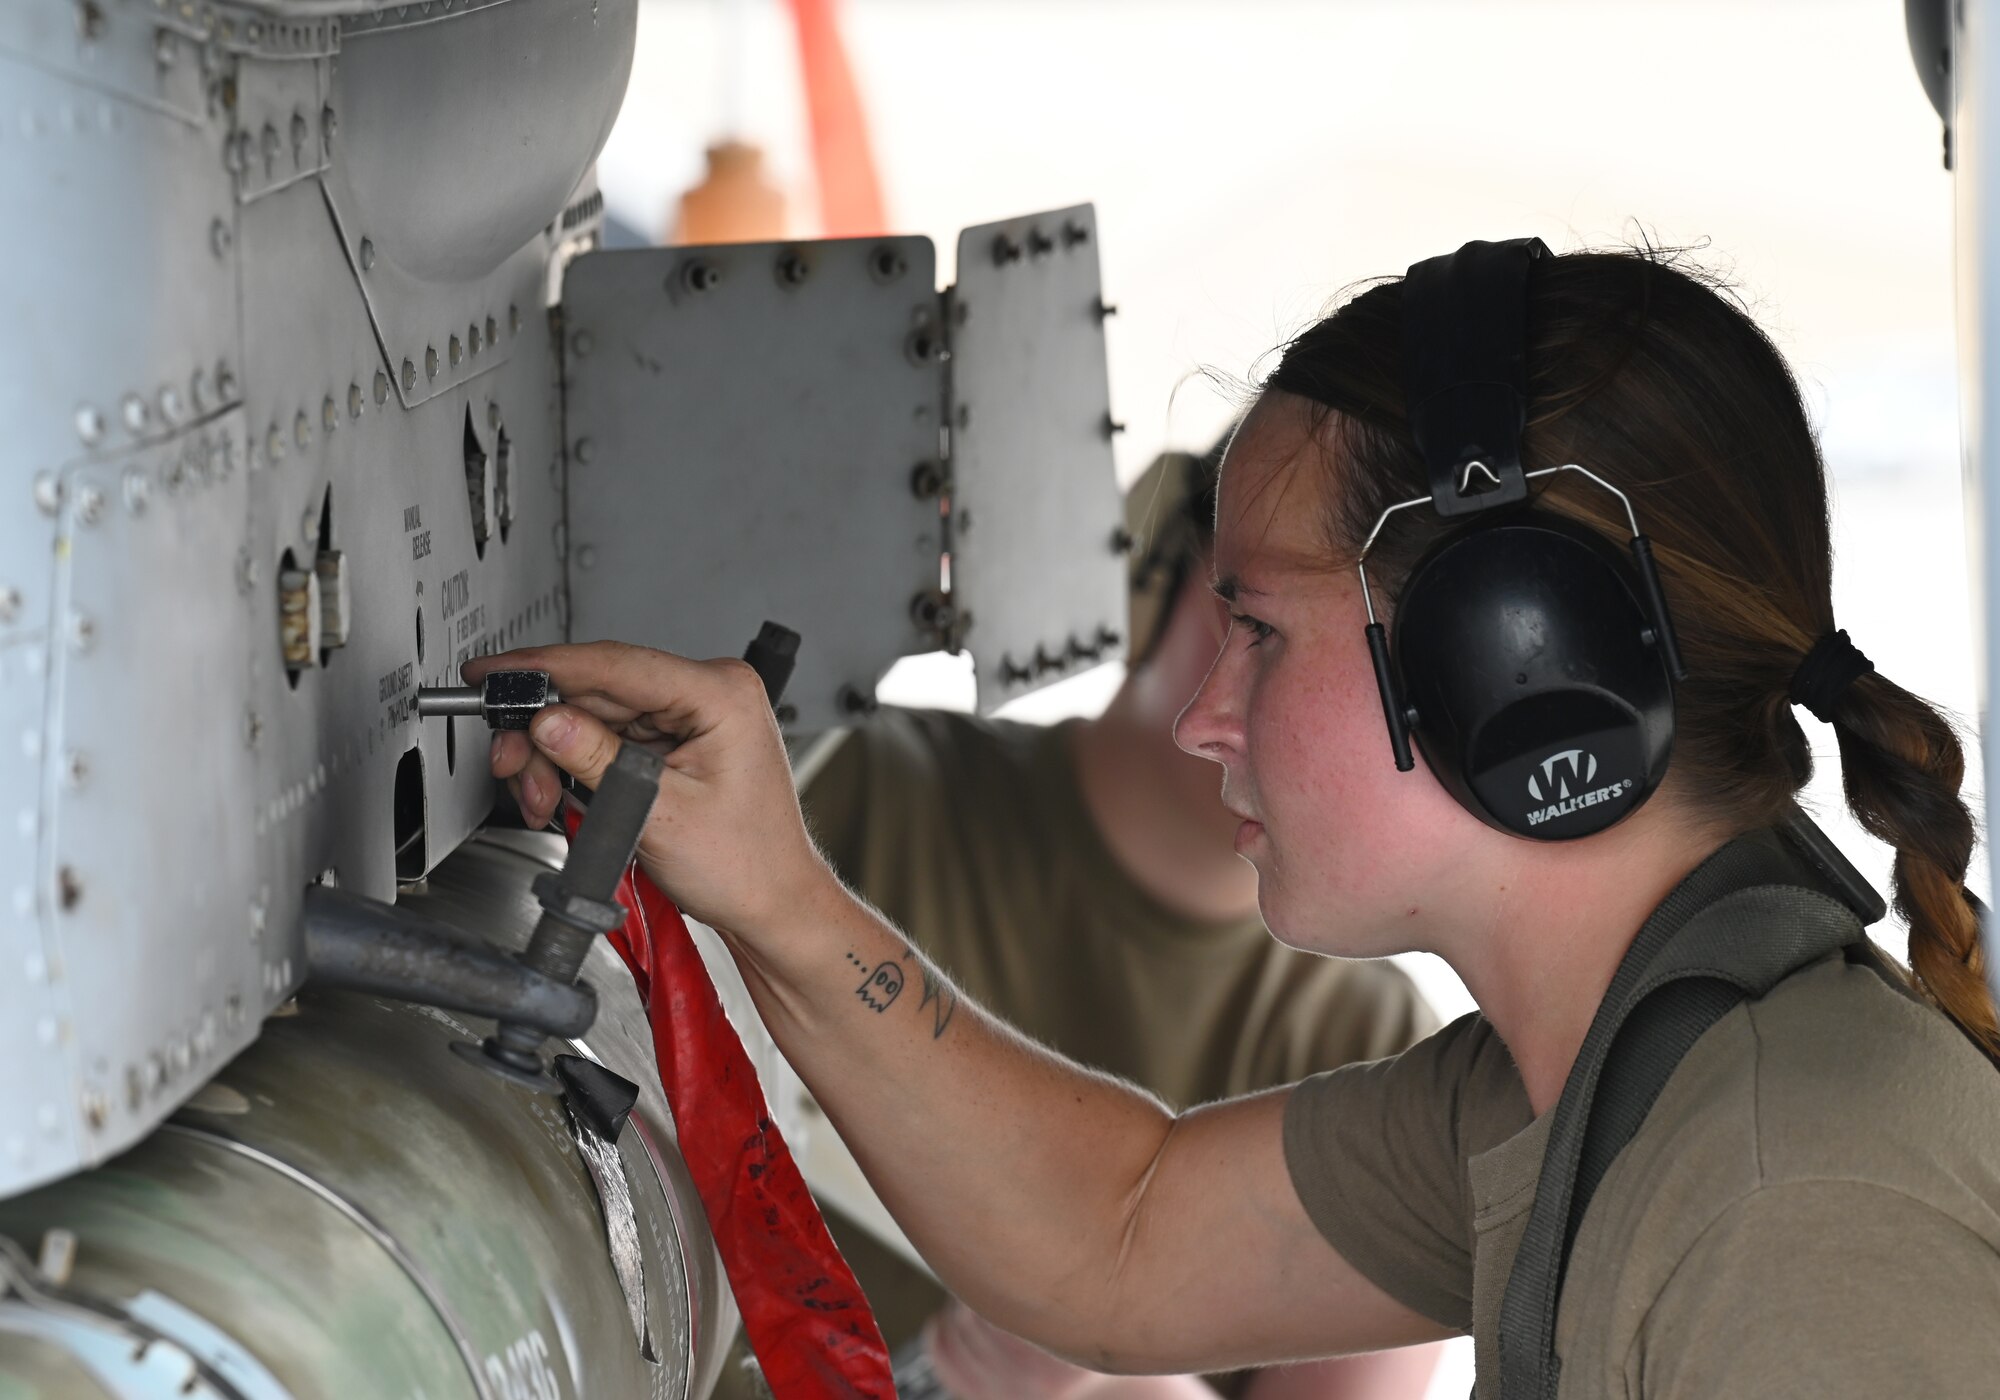 U.S. Air Force Staff Sgt. Journey Yanzick, 75th Expeditionary Fighter Generation Squadron weapons crew member, secures munitions onto a U.S. Air Force A-10 Thunderbolt II at Al Dhafra Air Base, United Arab Emirates, April 18, 2022. The loading of these munitions represents another step forward in the deployment of the A-10 to the U.S. Central Command area of responsibility, which offers the opportunity for 9th Air Force (Air Forces Central). to experiment with CAS capabilities in order to achieve the most robust, diverse force possible. Ninth AF (AFCENT) is committed to ensuring security and stability alongside our partners in the U.S. Central Command area of responsibility. (U.S. Air Force photo by Tech. Sgt. Alex Fox Echols III)